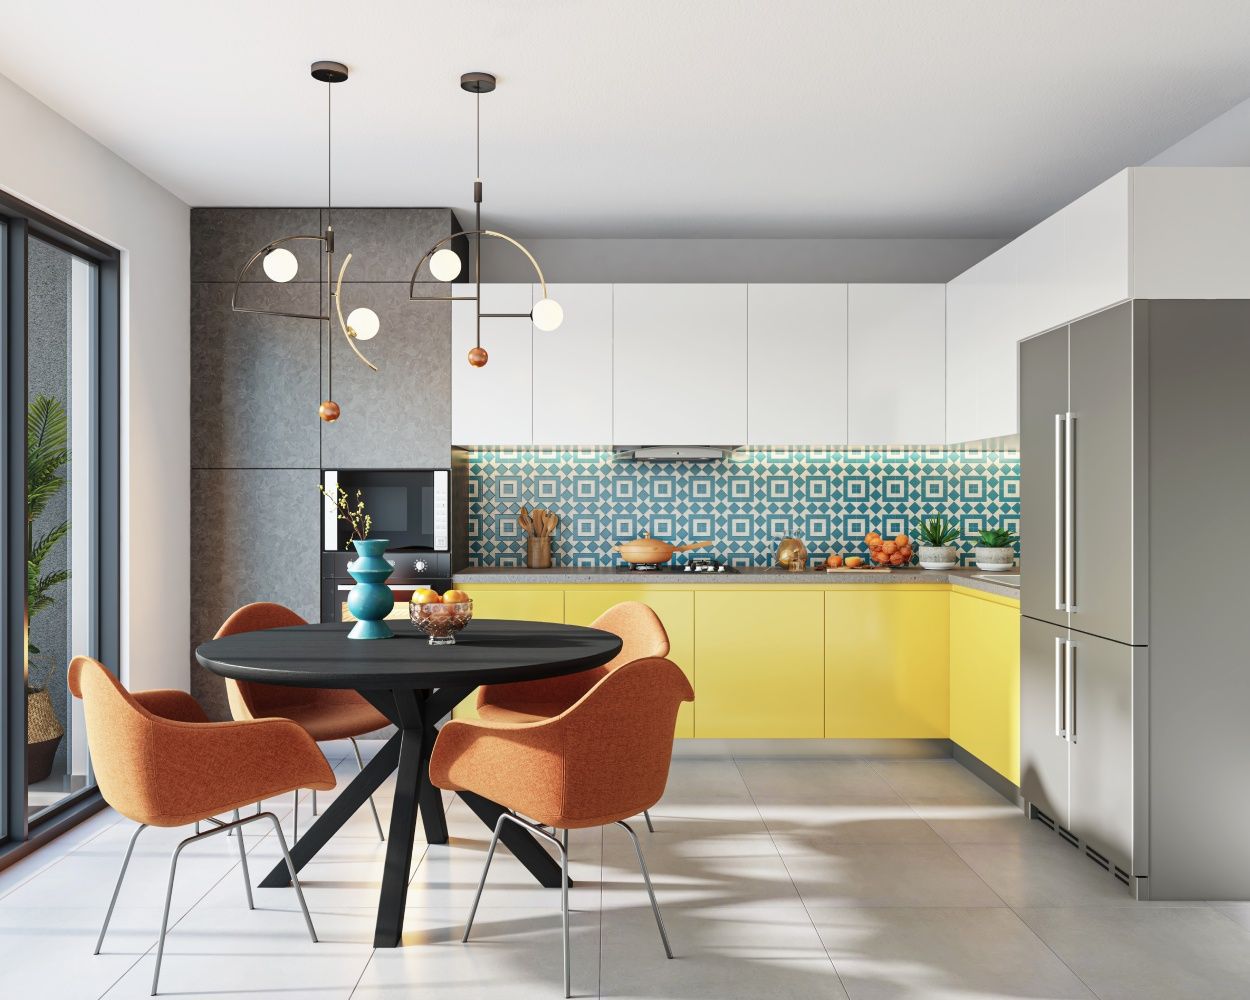 Contemporary Modular L Shape Kitchen Design With Marigold Yellow And Frosty White Cabinets